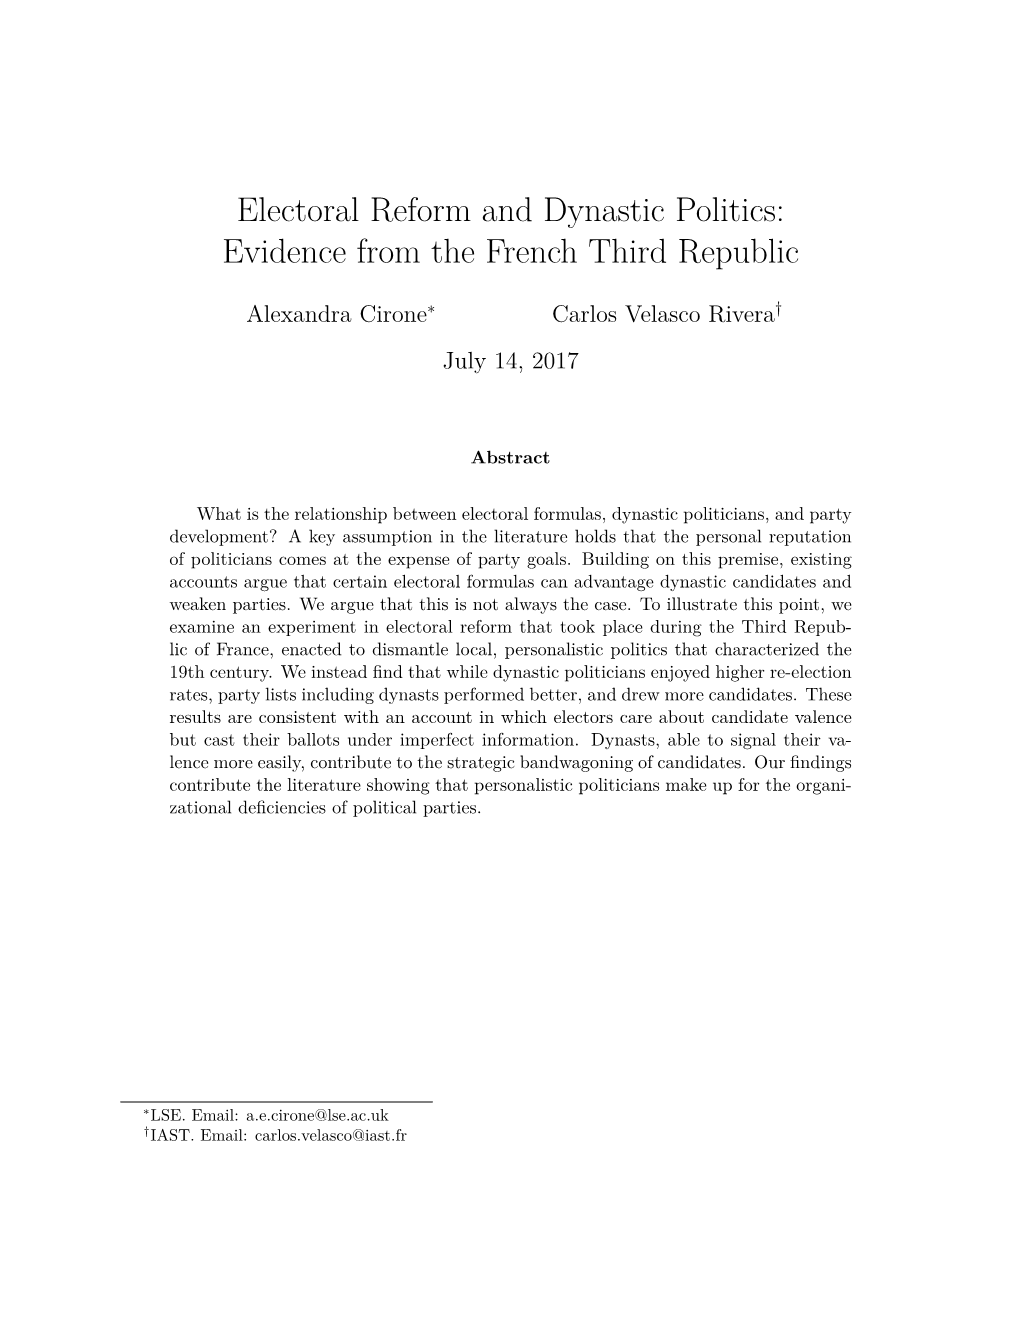 Electoral Reform and Dynastic Politics: Evidence from the French Third Republic